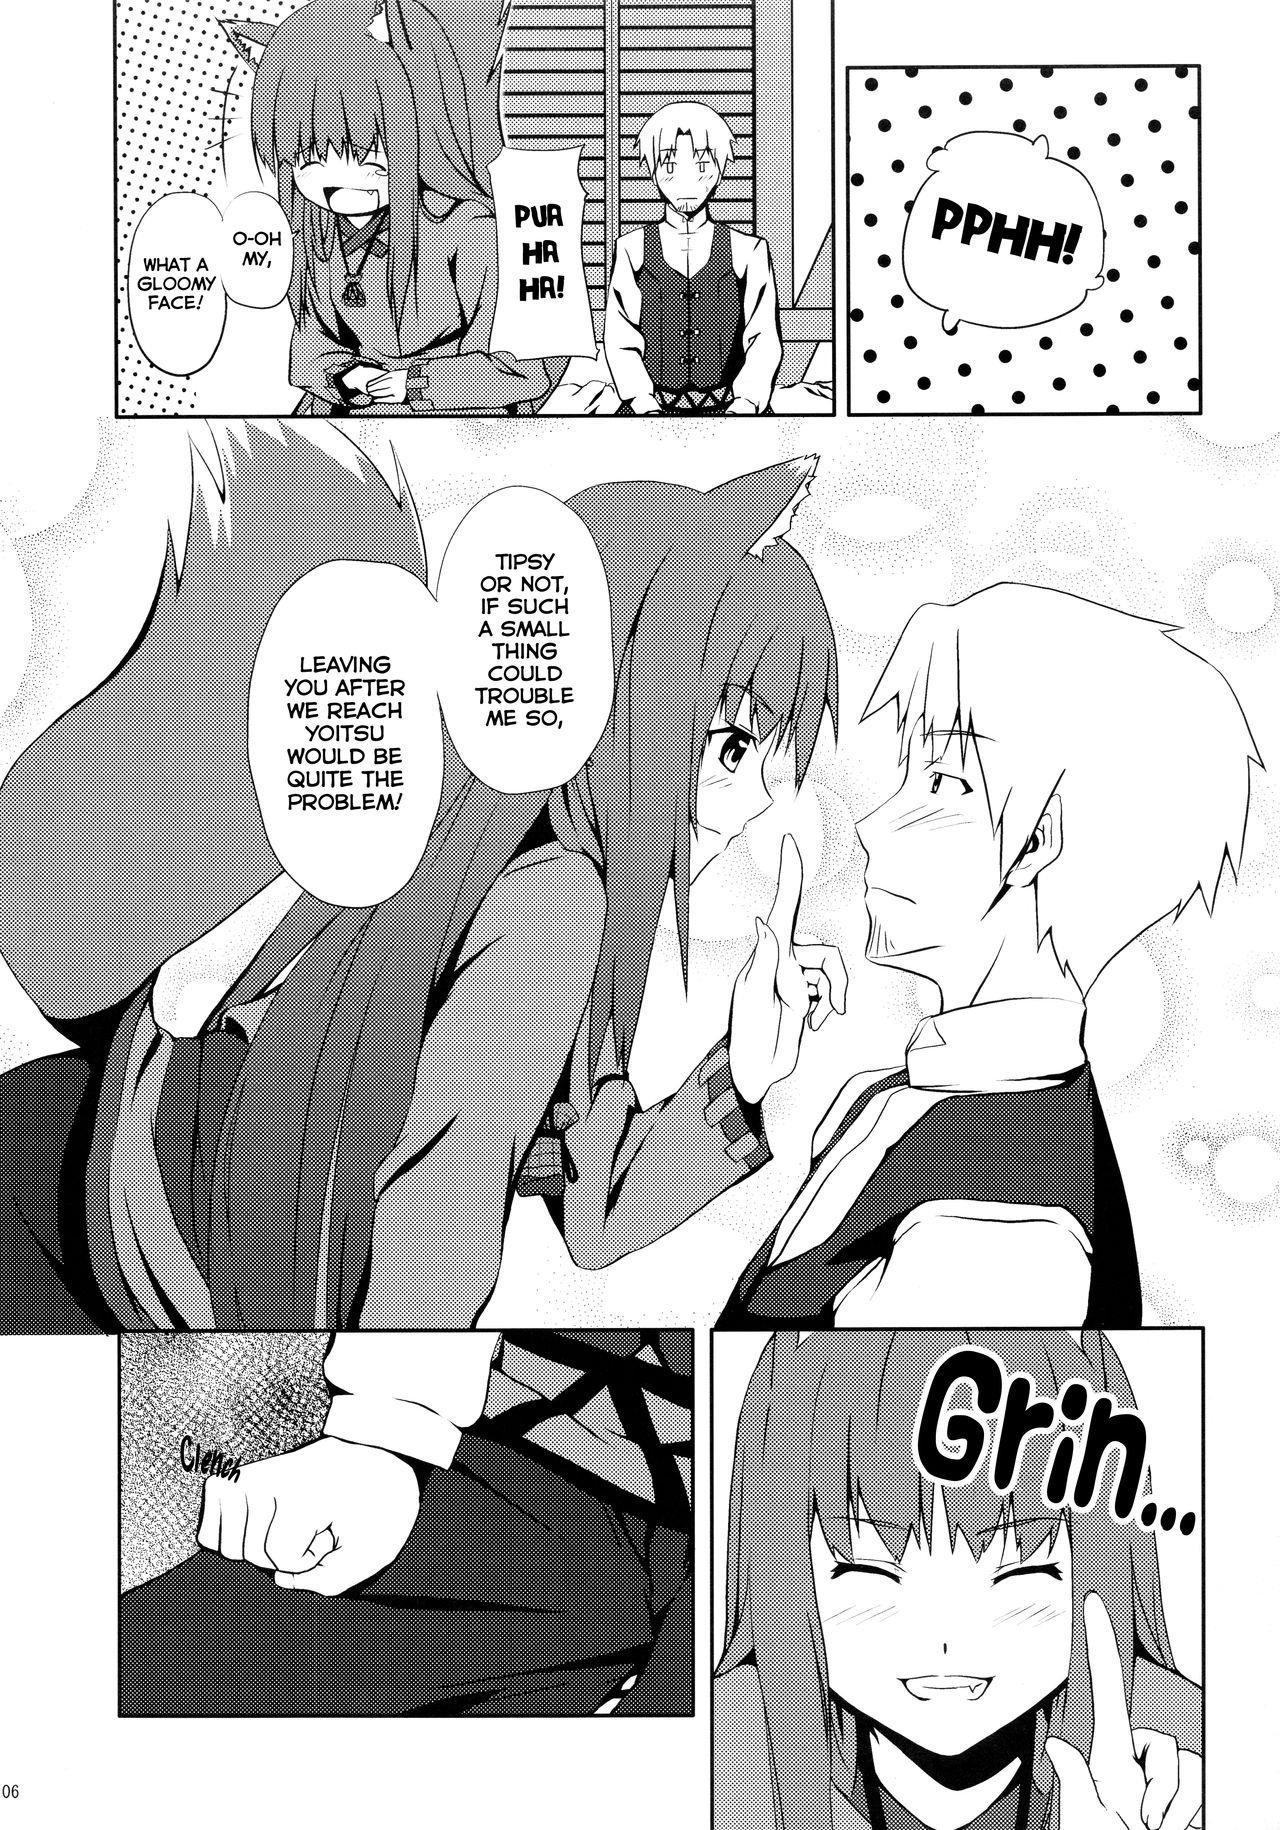 Free Blowjobs Bitter Apple - Spice and wolf Reverse - Page 6